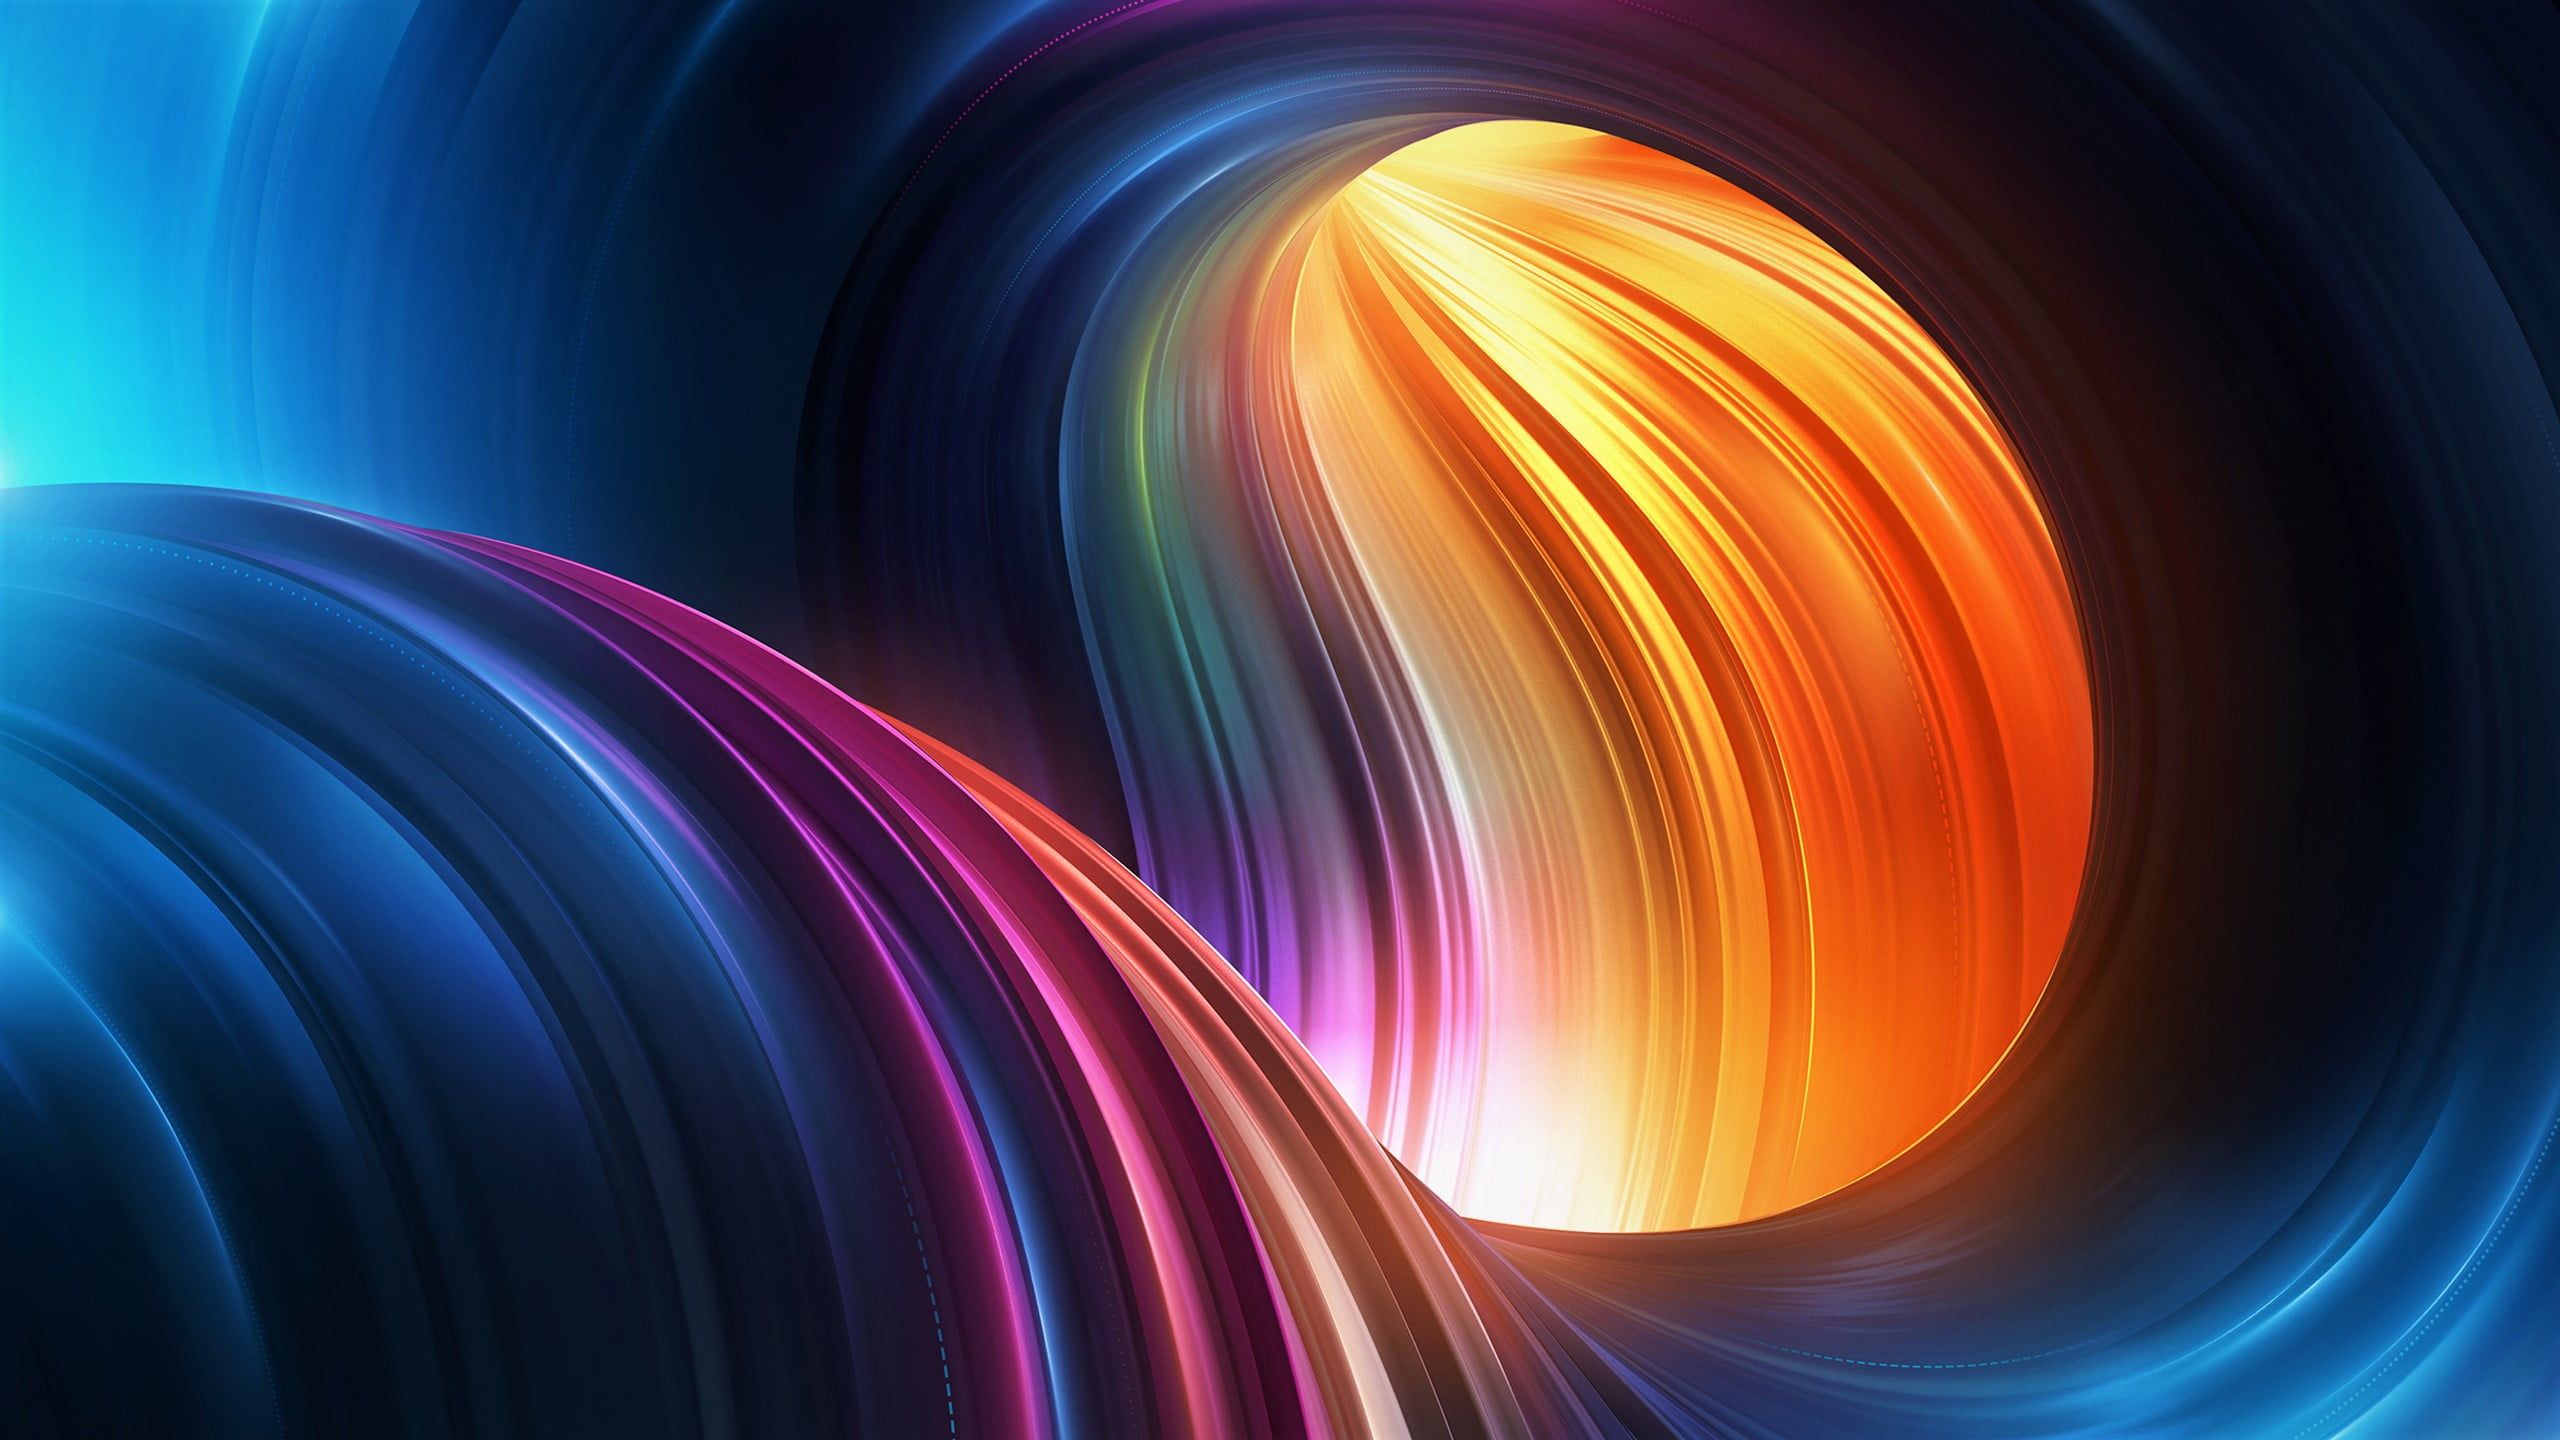 Abstract Wallpaper • Red and multicolored curve wave digital wallpaper, abstract wallpaper, 3D • Wallpaper For You The Best Wallpaper For Desktop & Mobile